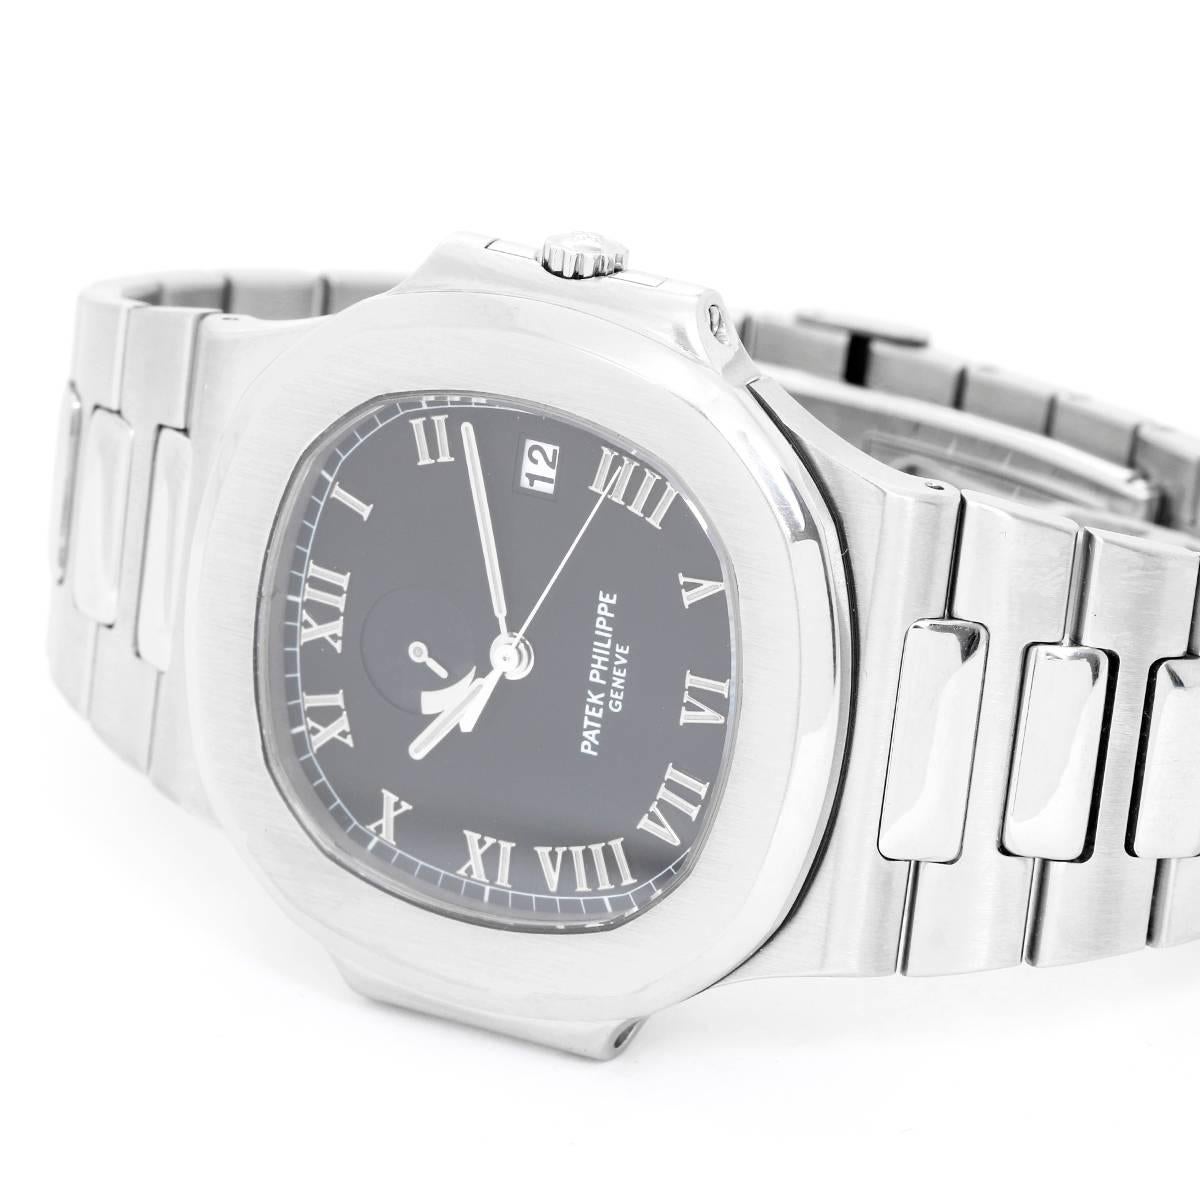 Patek Philippe & Co. Nautilus Stainless Steel Watch Ref 3710 -  Automatic with a 48 hour power reserve. Stainless Steel ( 41 mm  x 45 mm ). Black dial with raised Roman numerals; date at 3:00 o'clock. Stainless steel Nautilus bracelet. Pre-owned